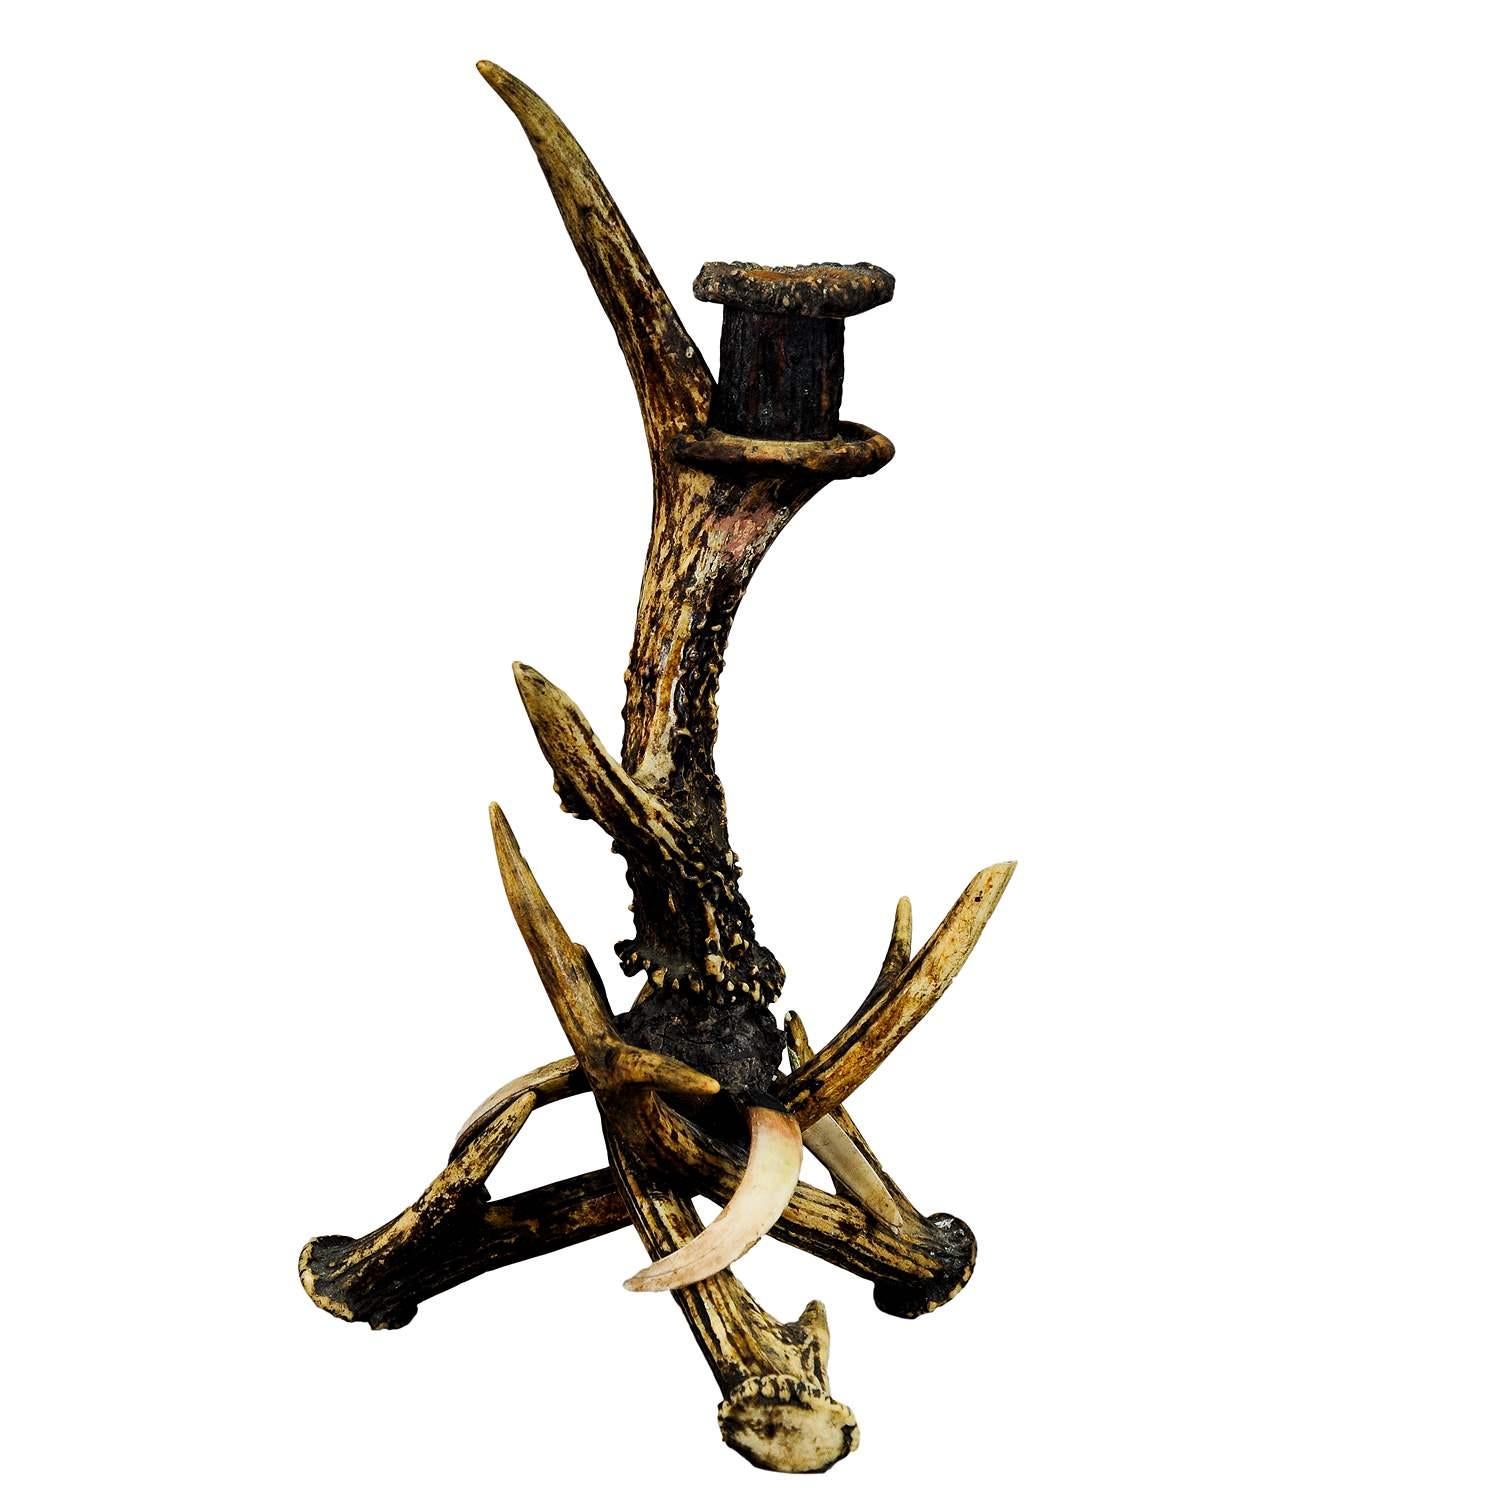 A rustic candle holder, made of antlers from the deer decorated with wild boar tusks. The spout is made of turned antler pieces. It is executed in Germany, Black Forest circa 1890. A nice rustic decoration for a desk or mantle in your log